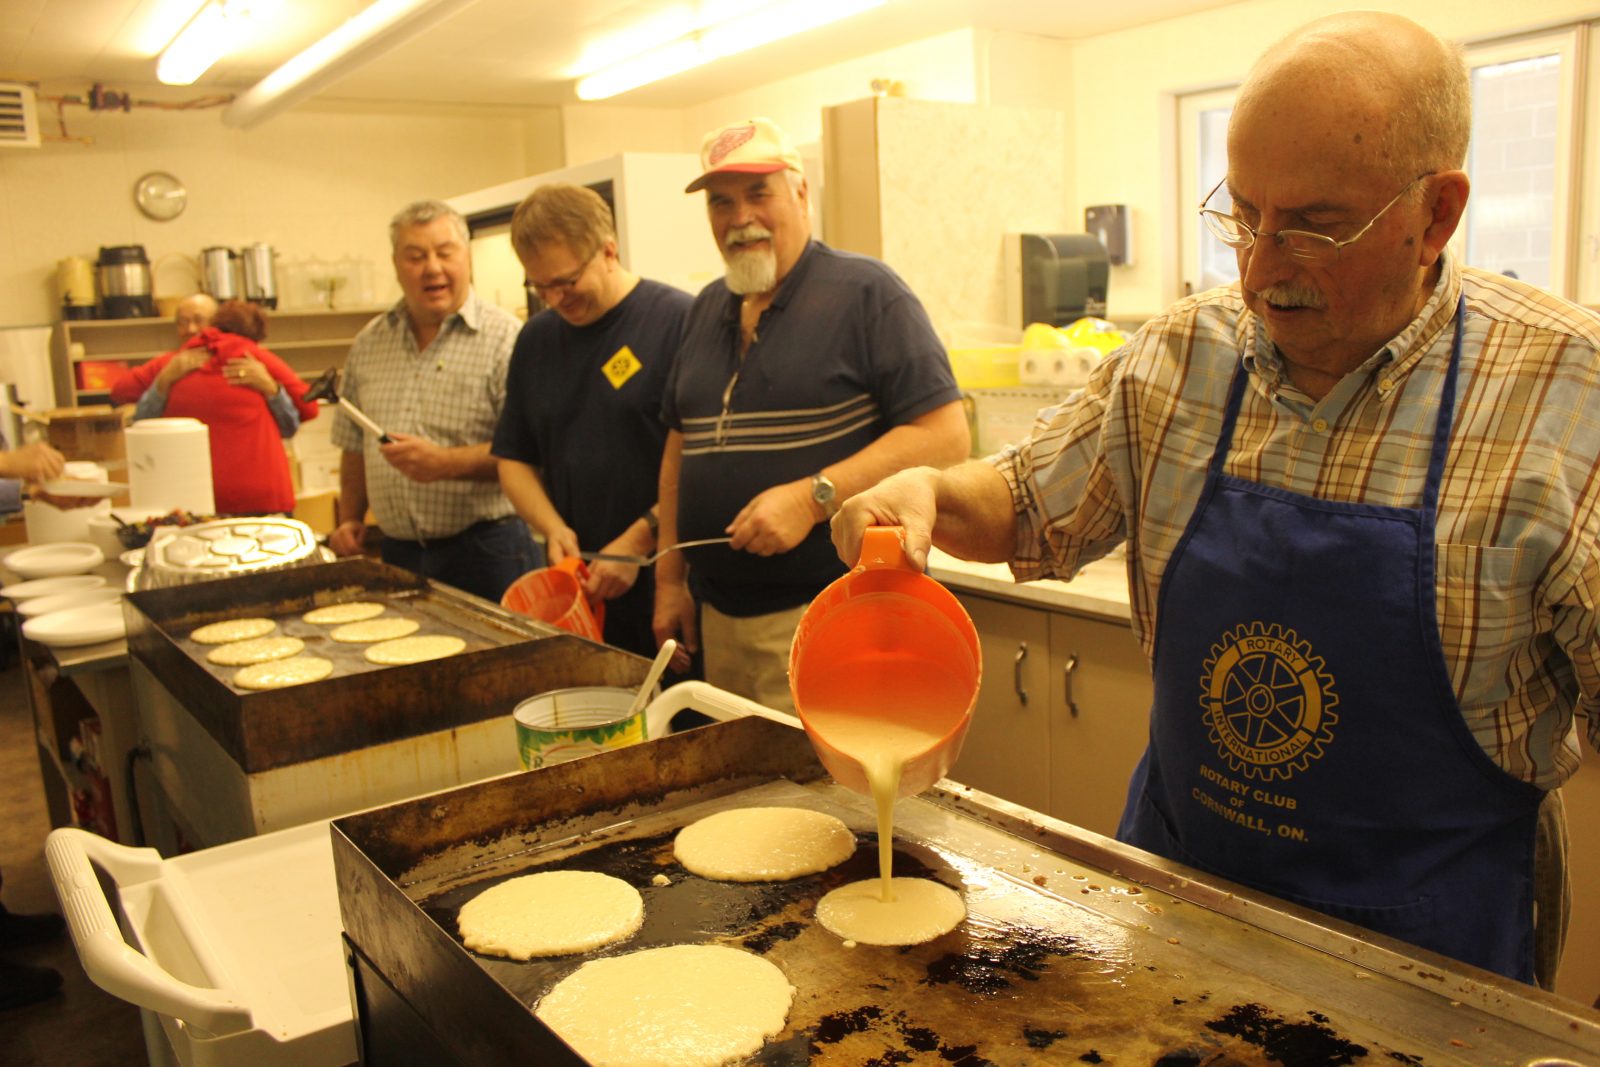 Flipping flapjacks and fundraising